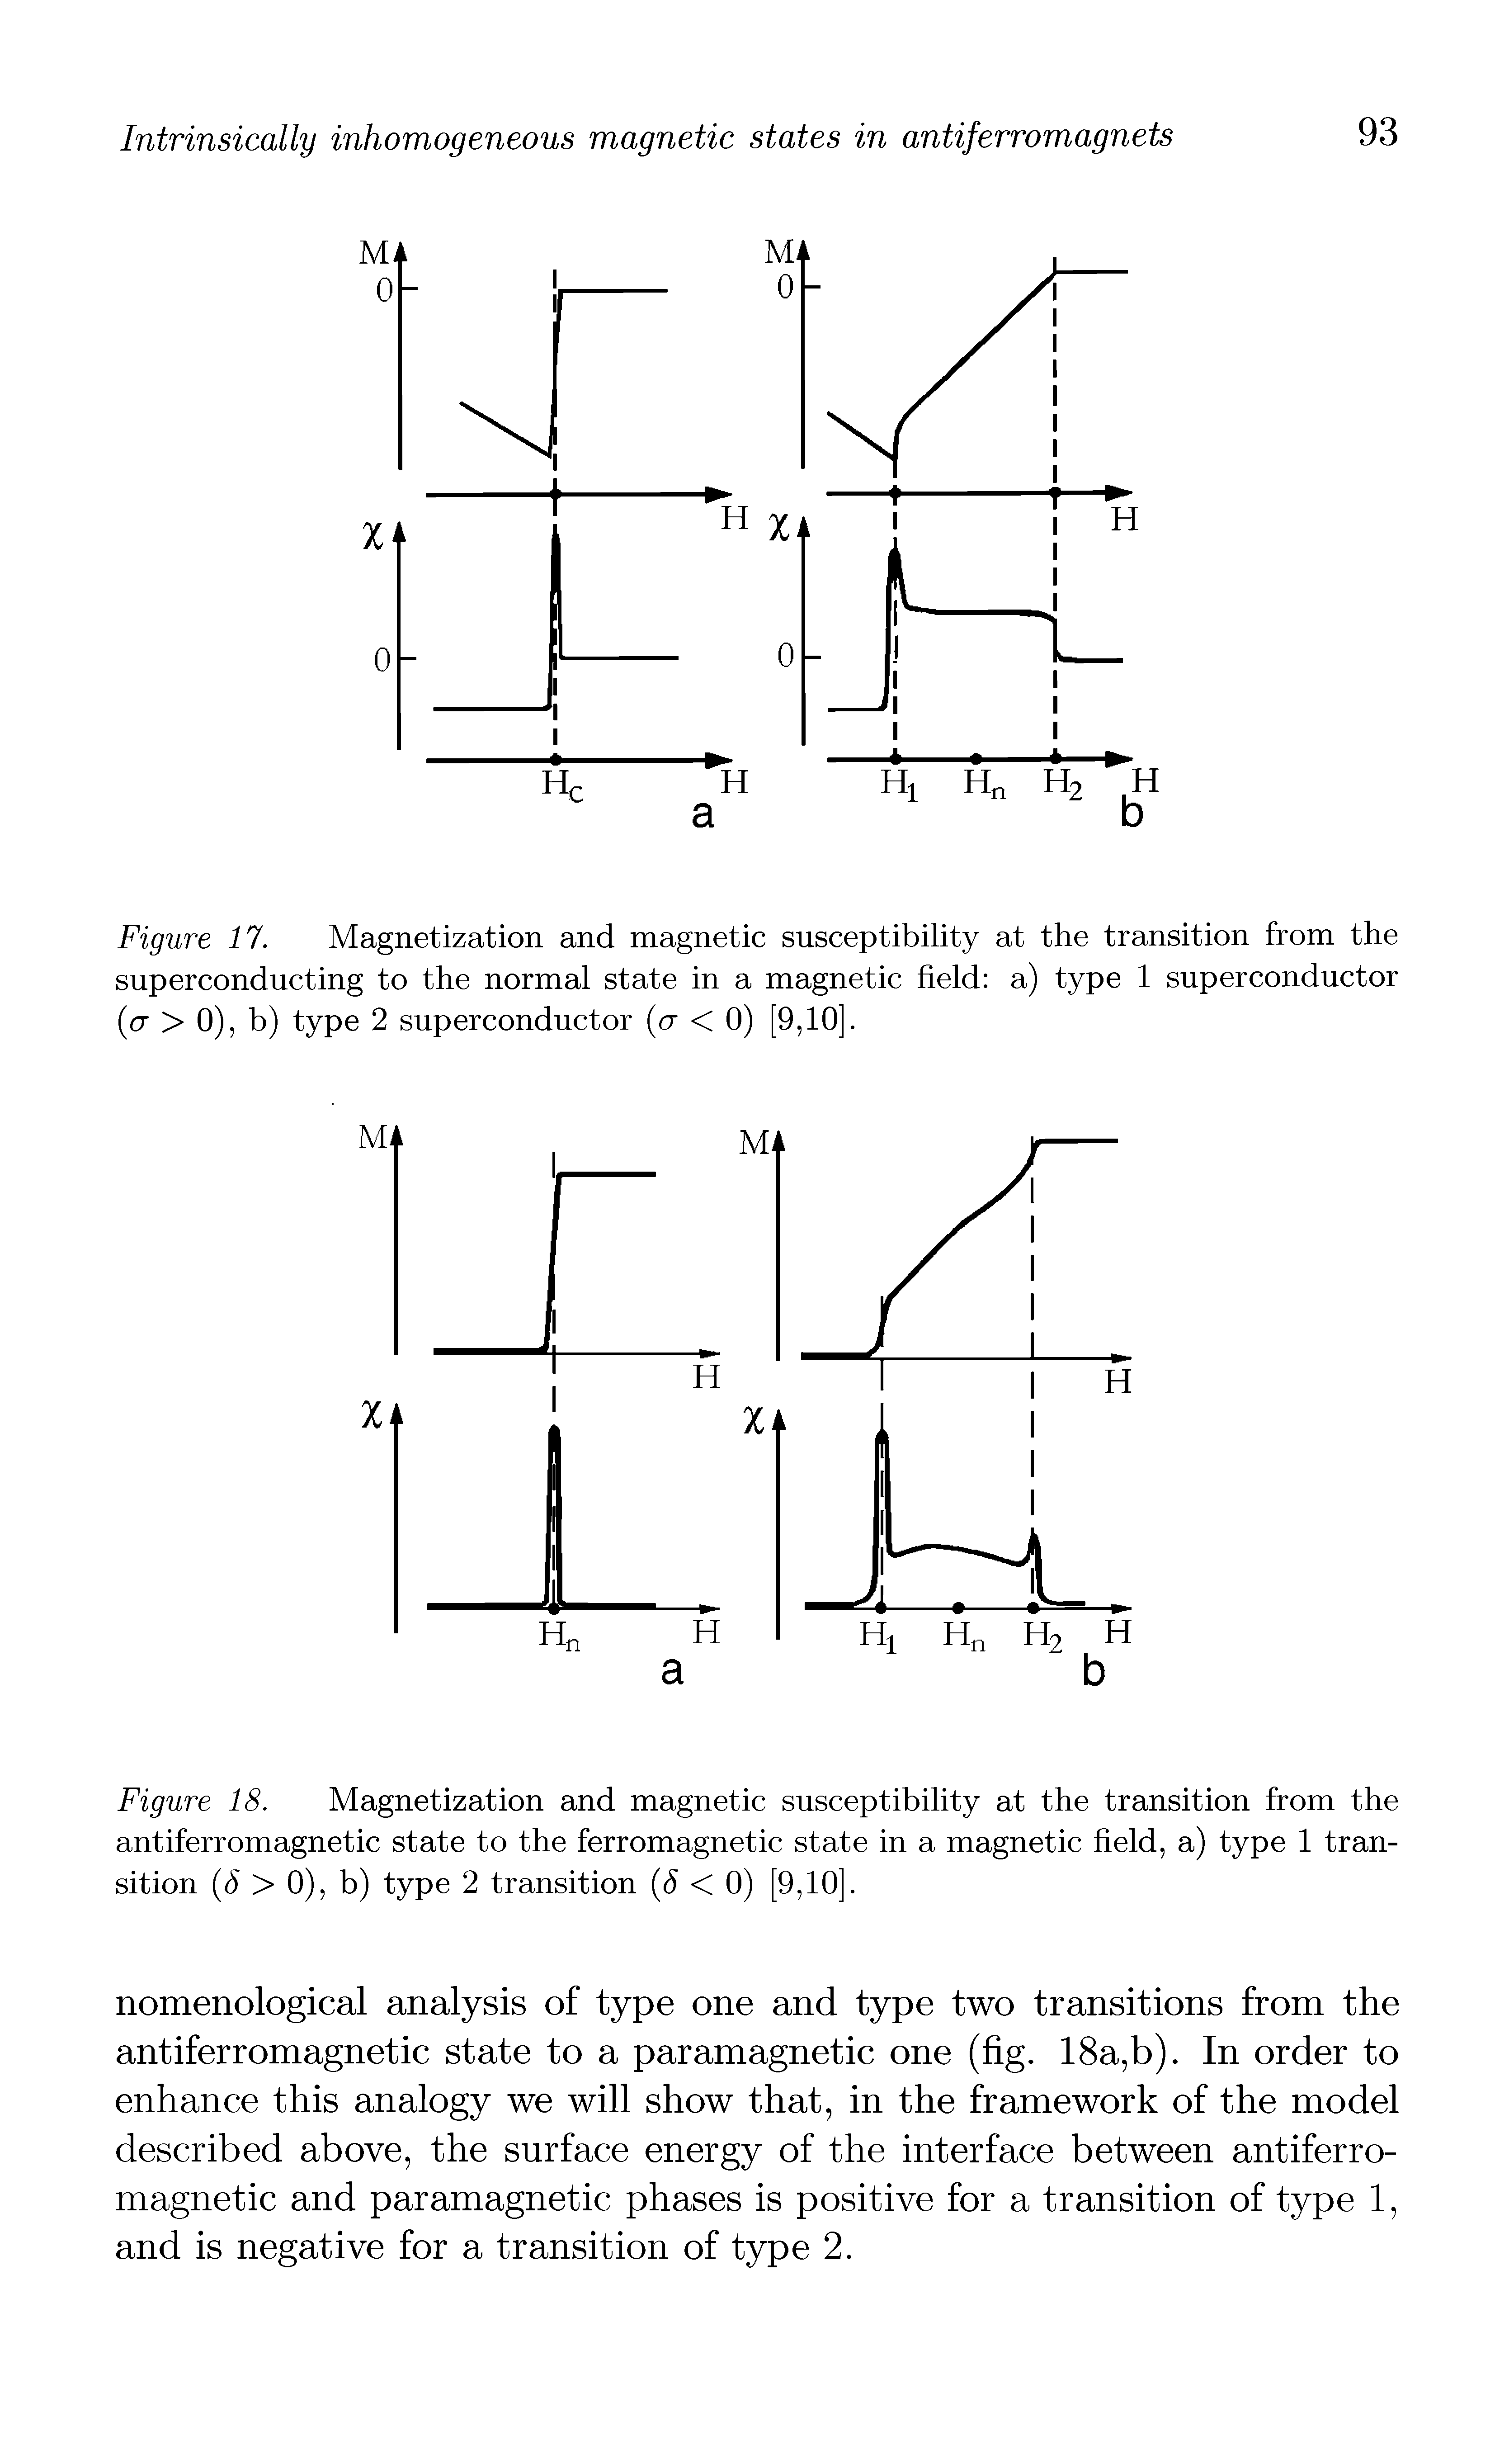 Figure 17. Magnetization and magnetic susceptibility at the transition from the superconducting to the normal state in a magnetic field a) type 1 superconductor (cr > 0), b) type 2 superconductor (cr < 0) [9,10].